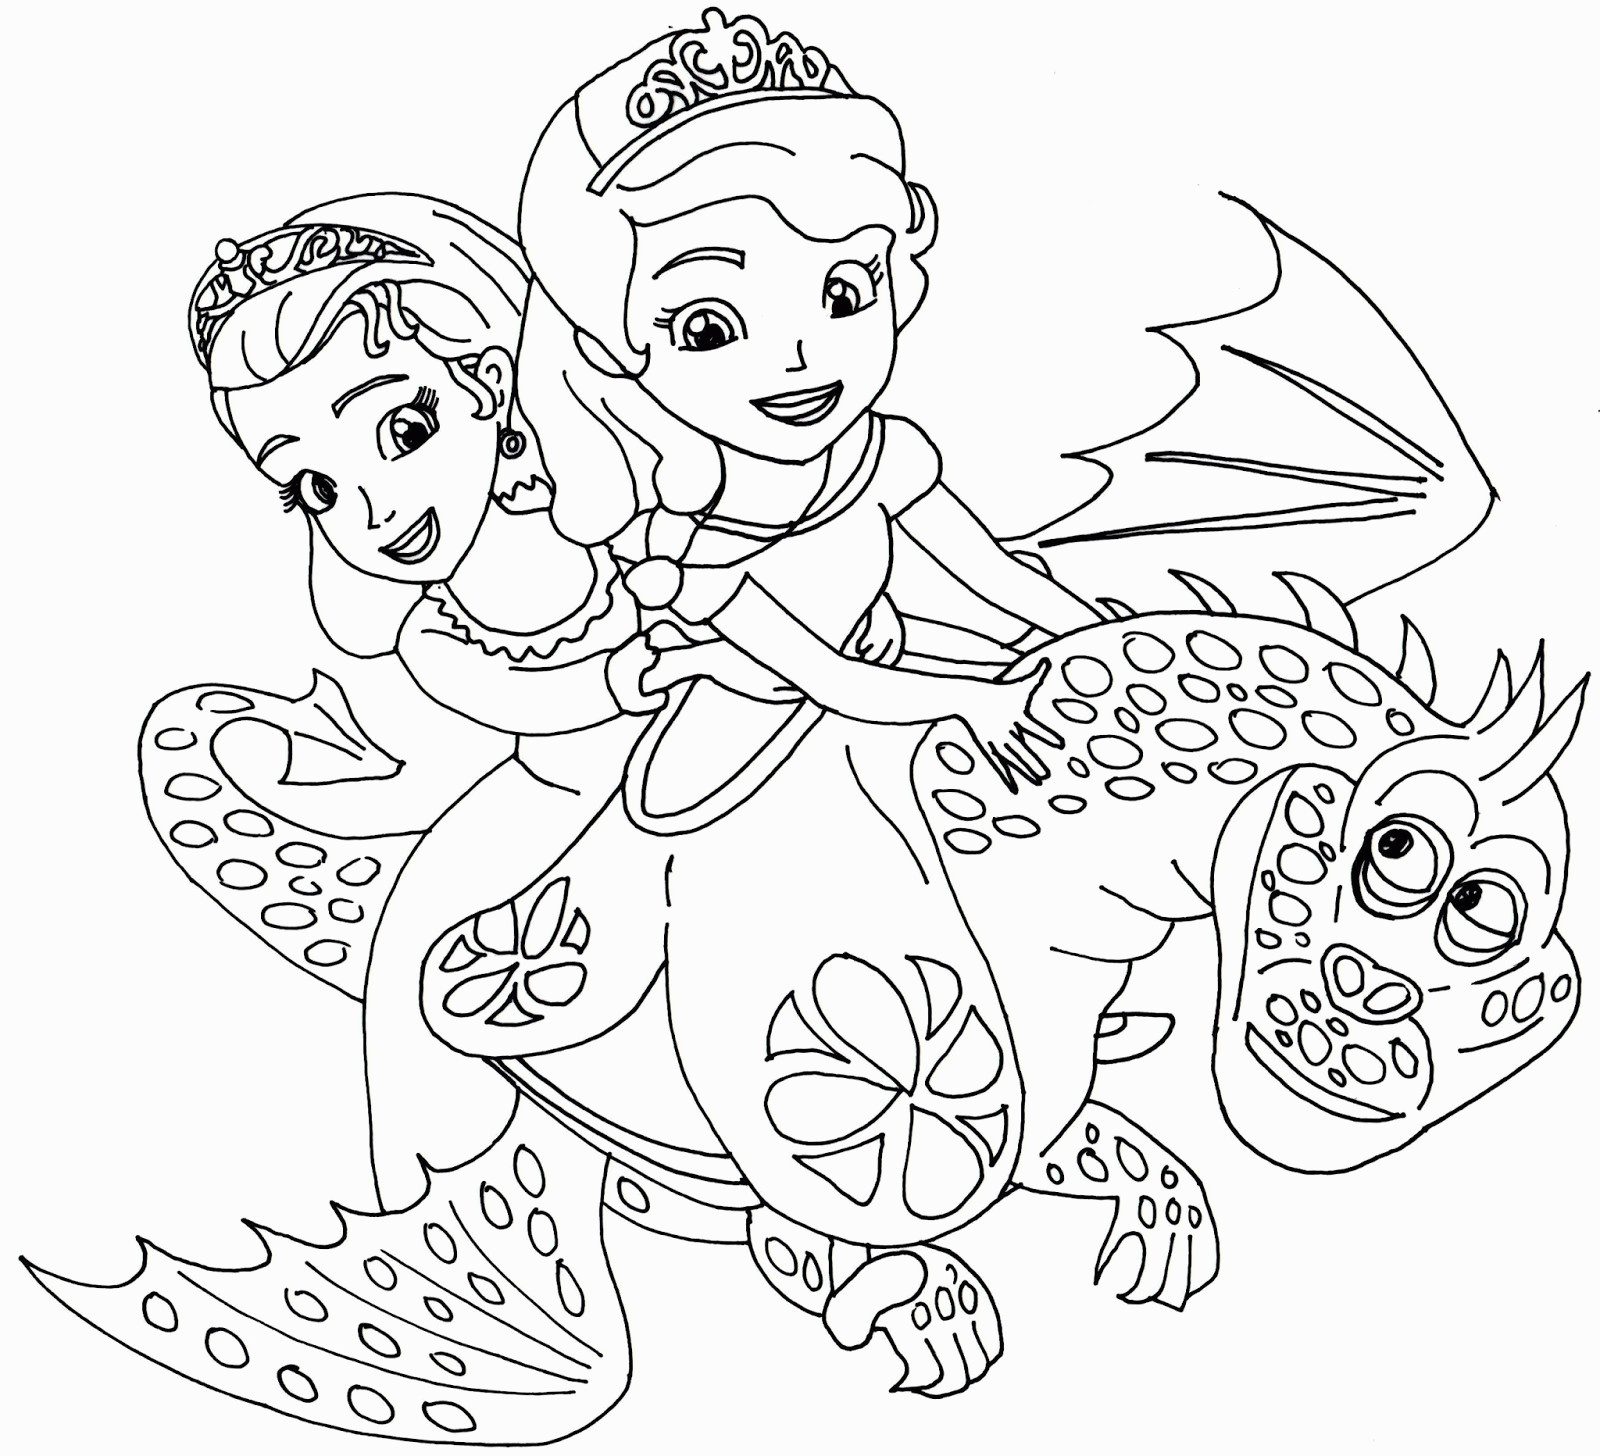 Sofia The First Coloring Pages
 Sofia the First Coloring Pages Best Coloring Pages For Kids